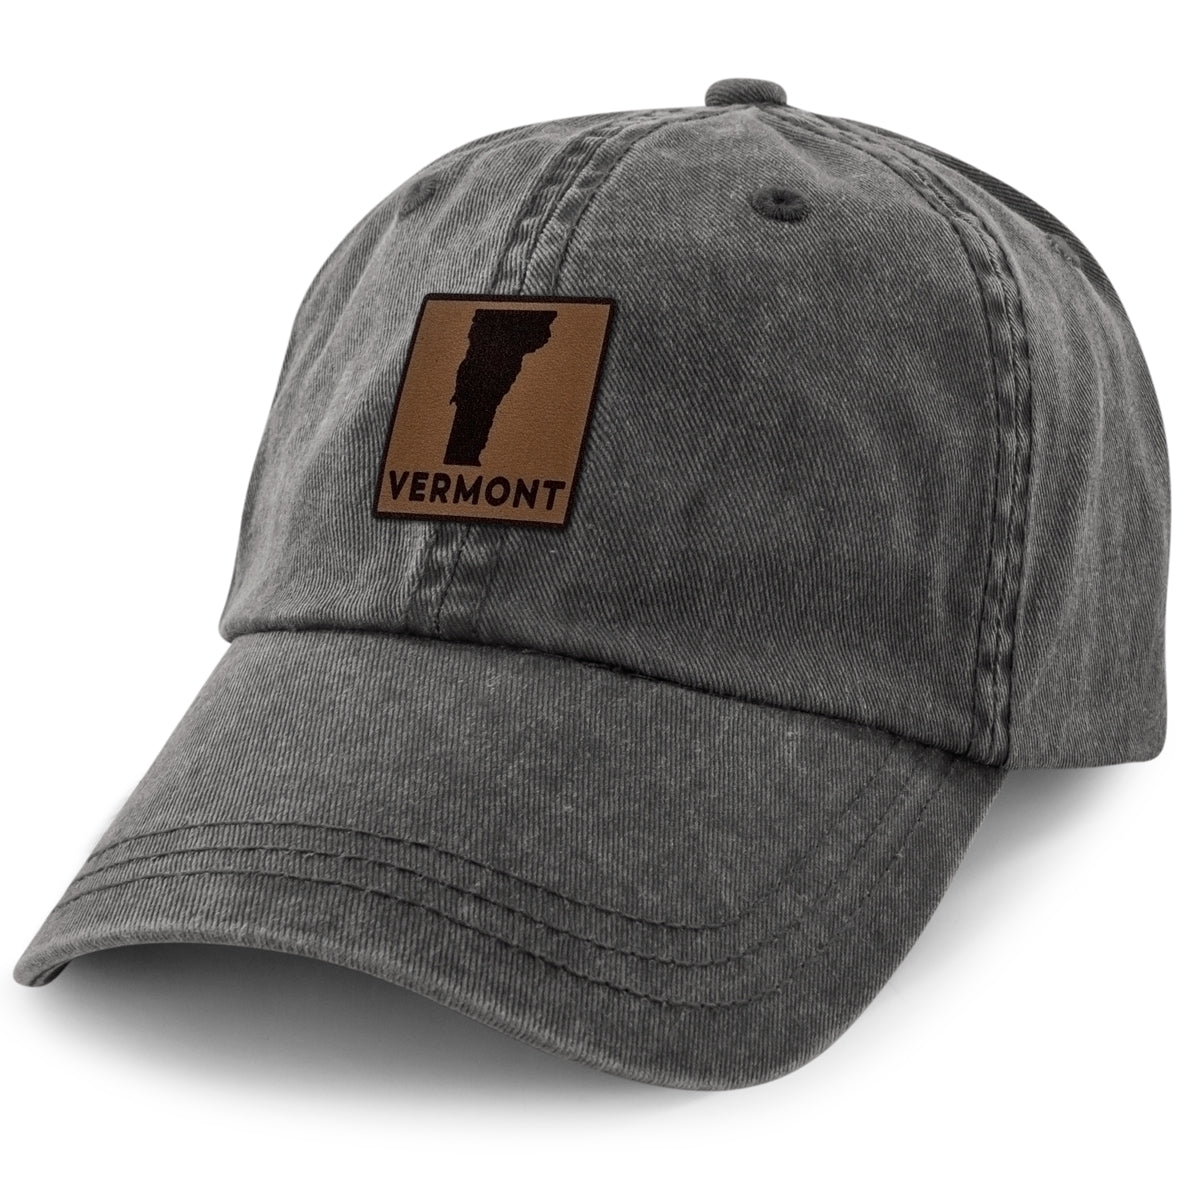 Vermont Leather Patch Washed Dad Hat - Chowdaheadz